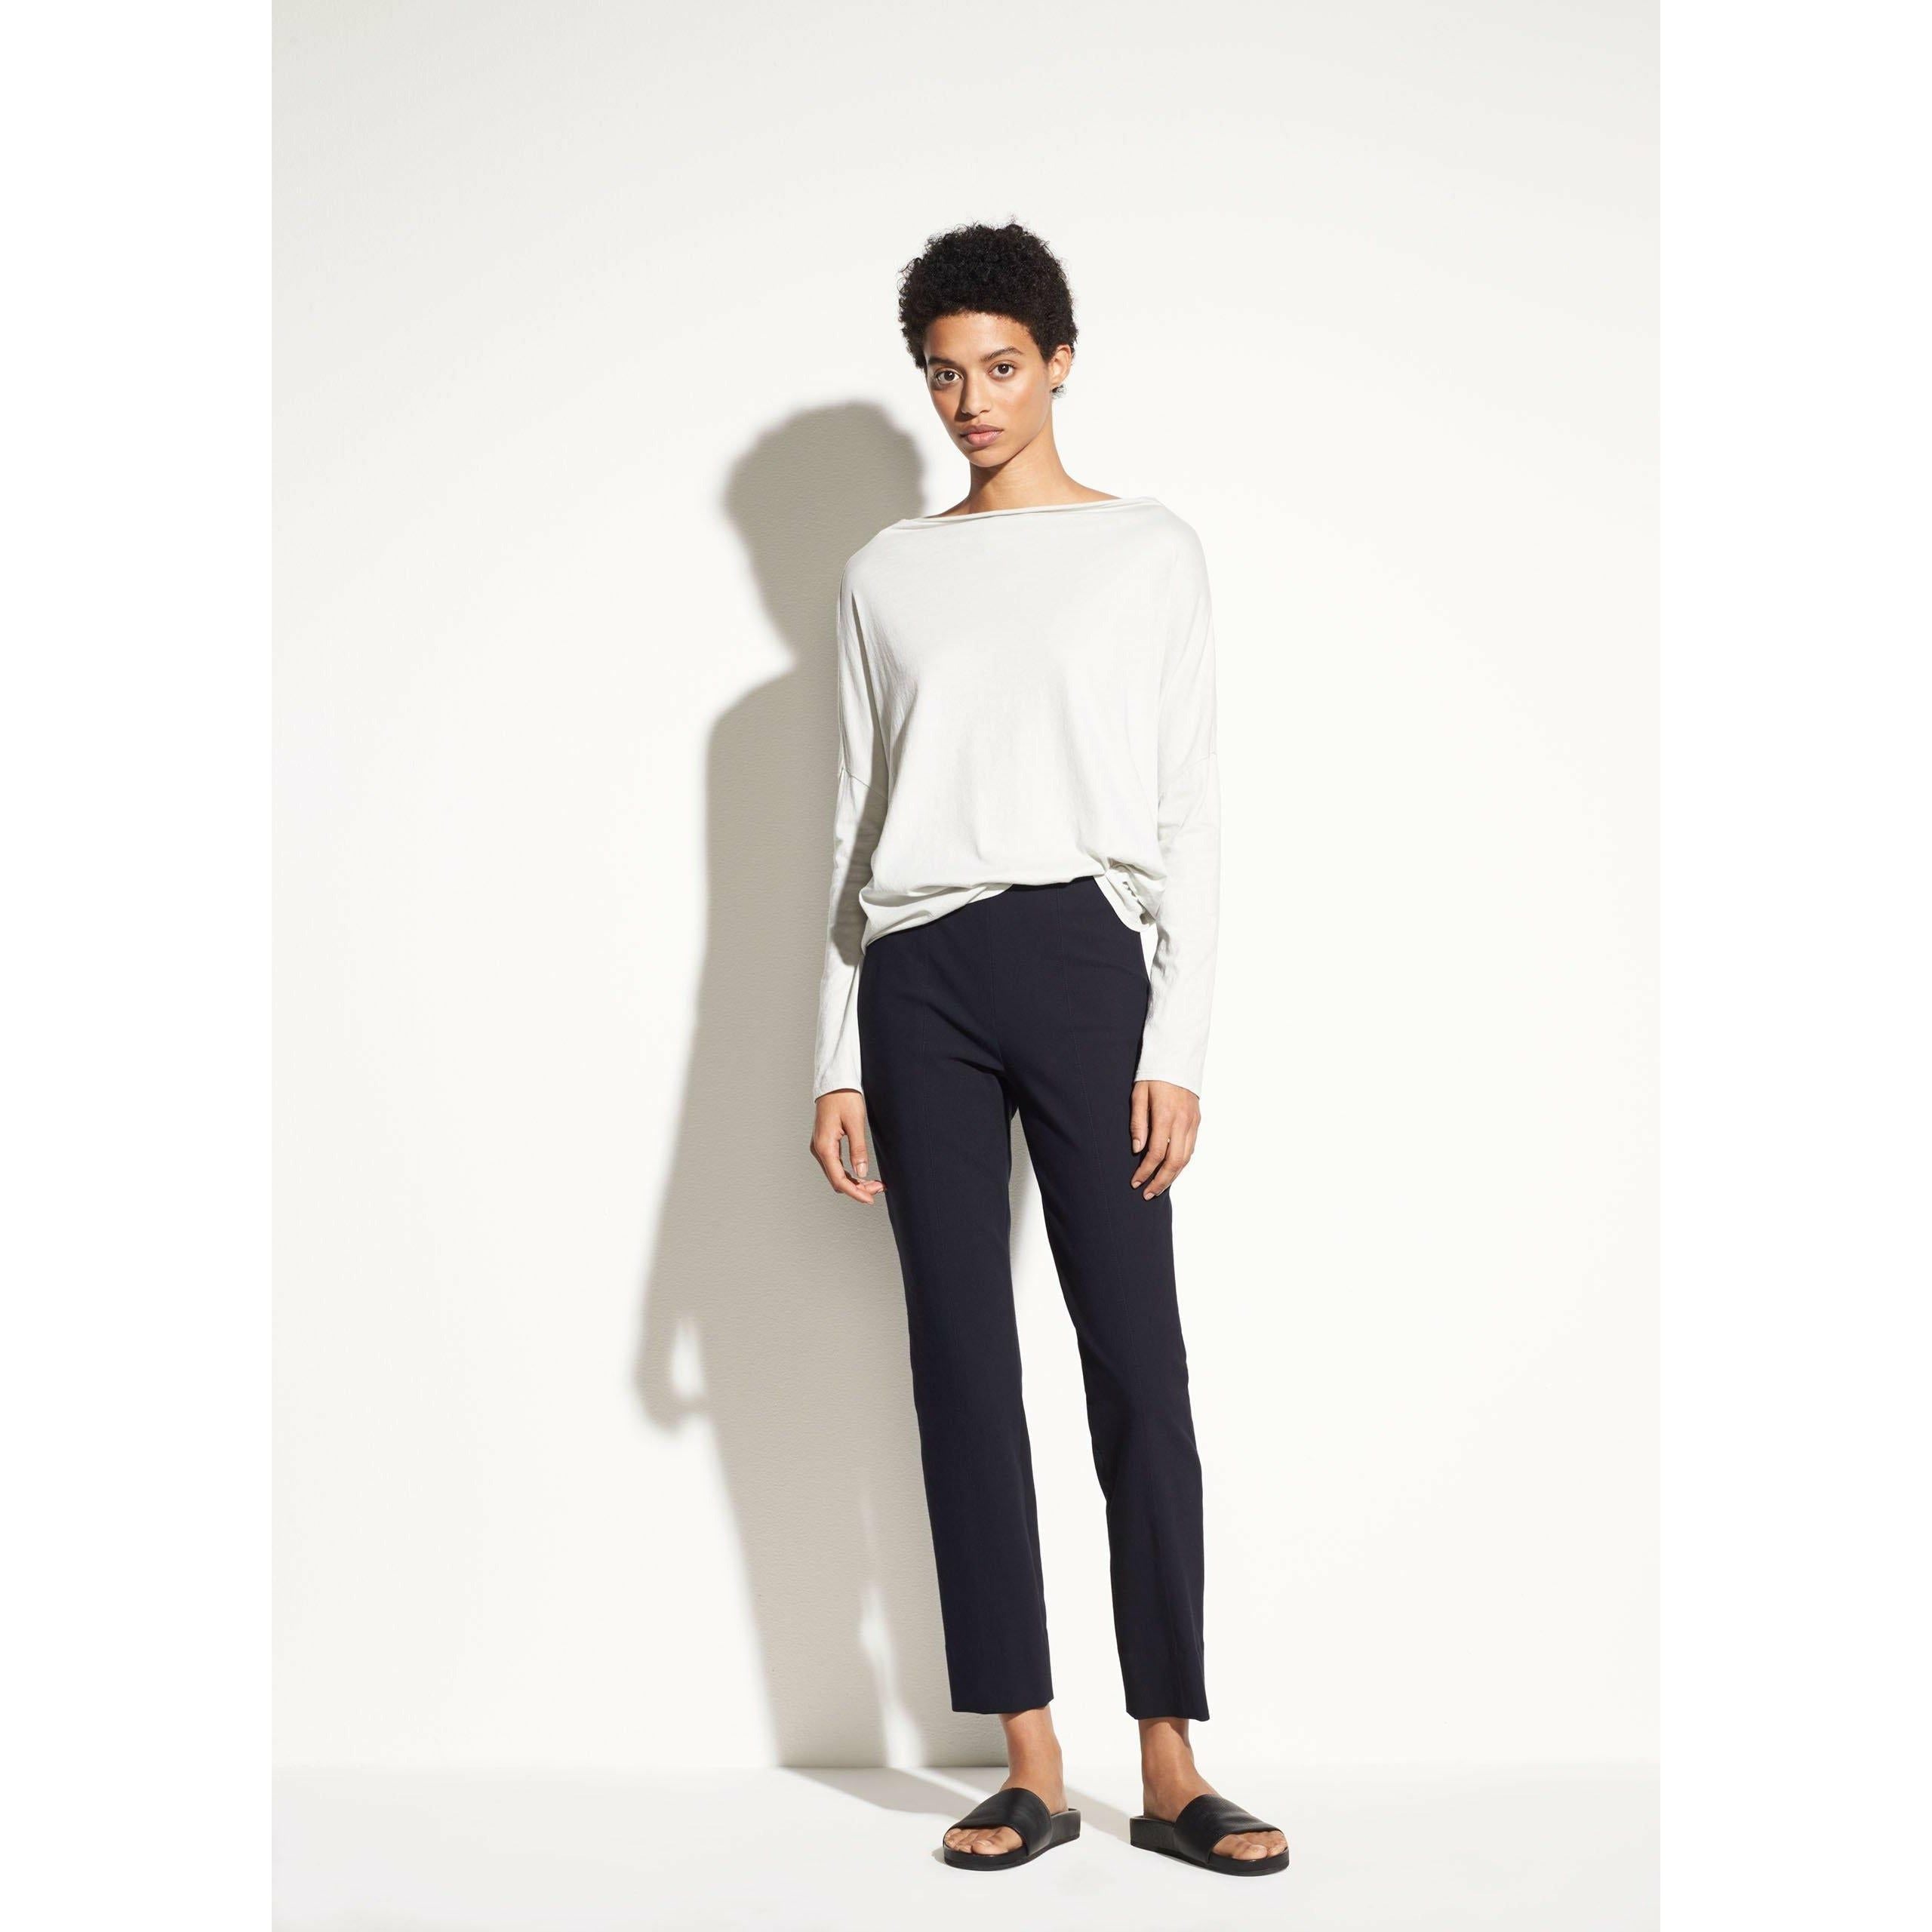 Tech Ponte Black Legging With A Sleek Silhouette From Vince PATRICIA